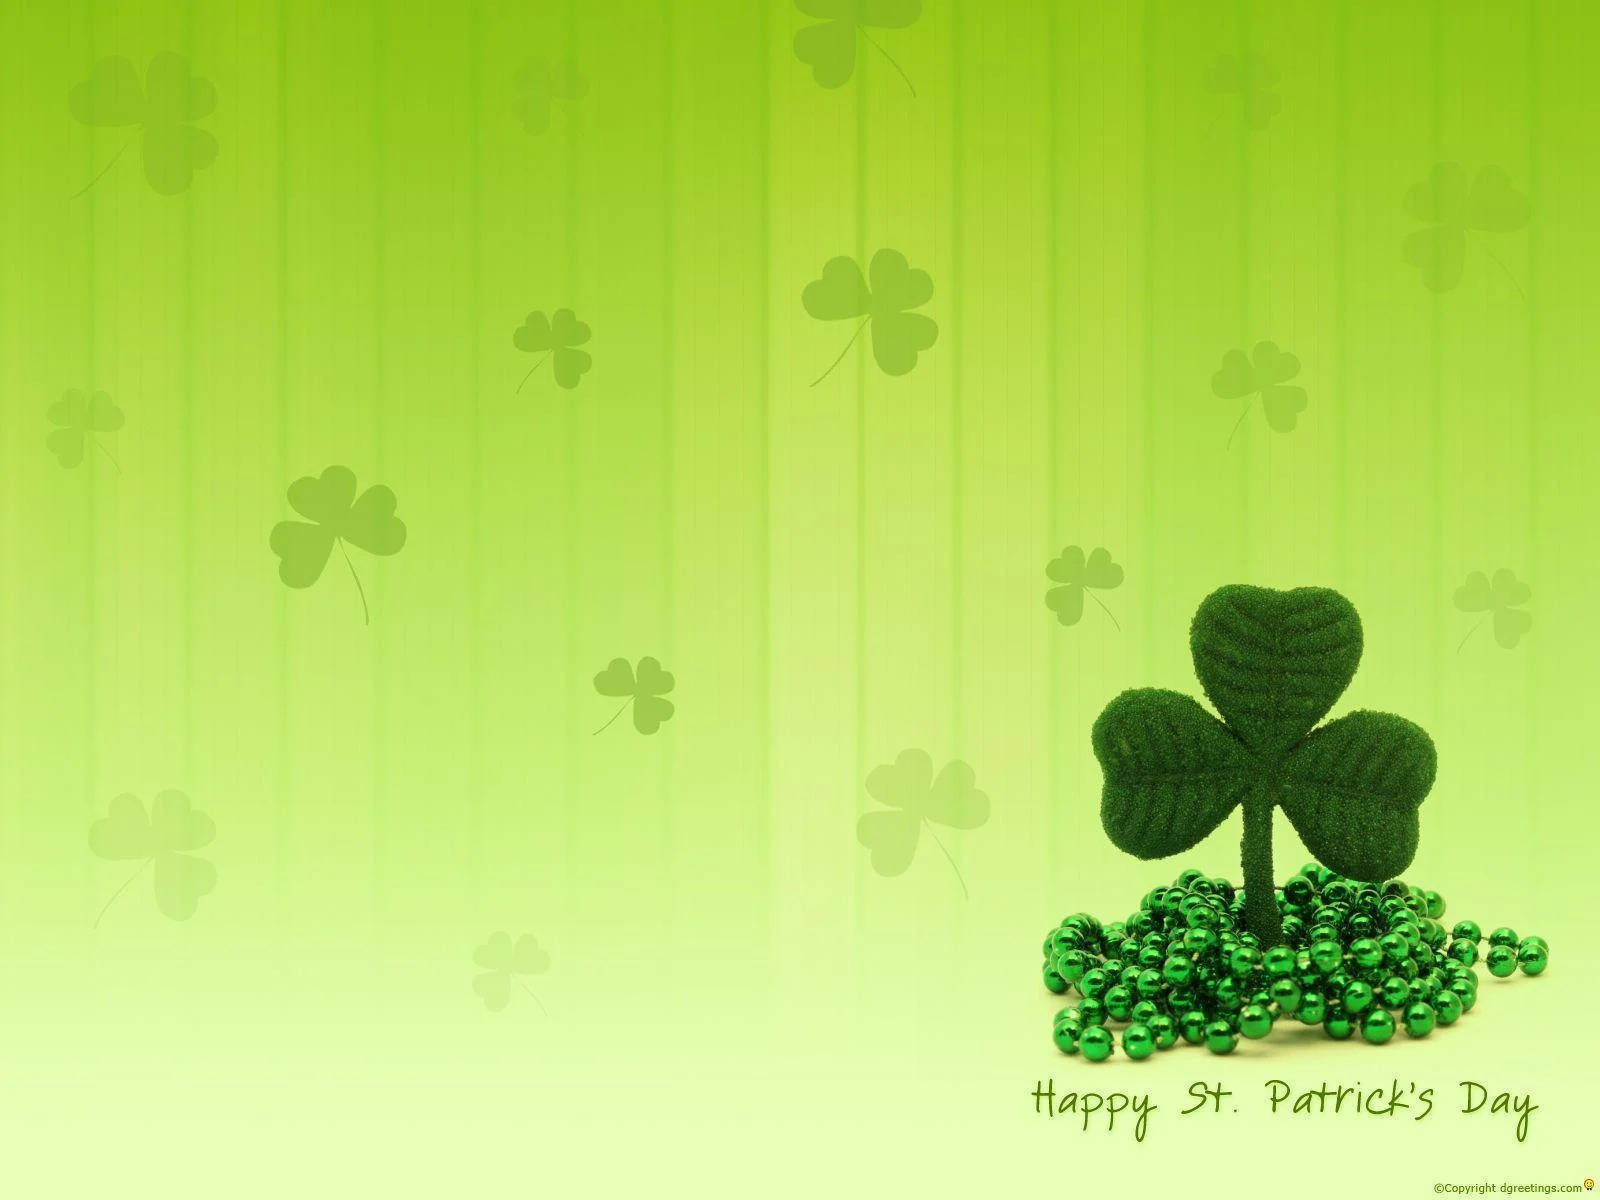 Saint Patrick’s Day With Clover Leaf Background